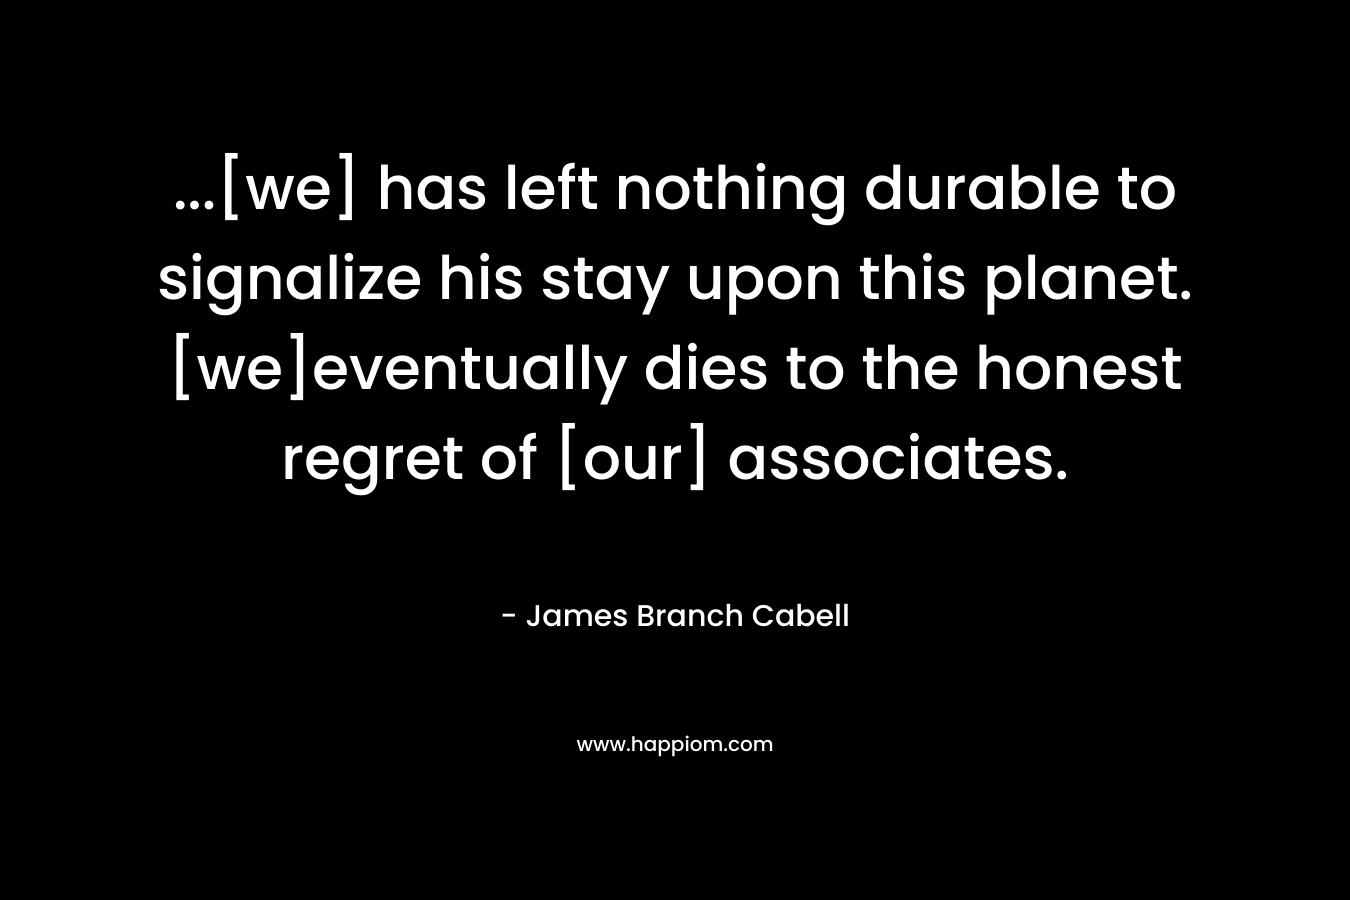 …[we] has left nothing durable to signalize his stay upon this planet.[we]eventually dies to the honest regret of [our] associates. – James Branch Cabell